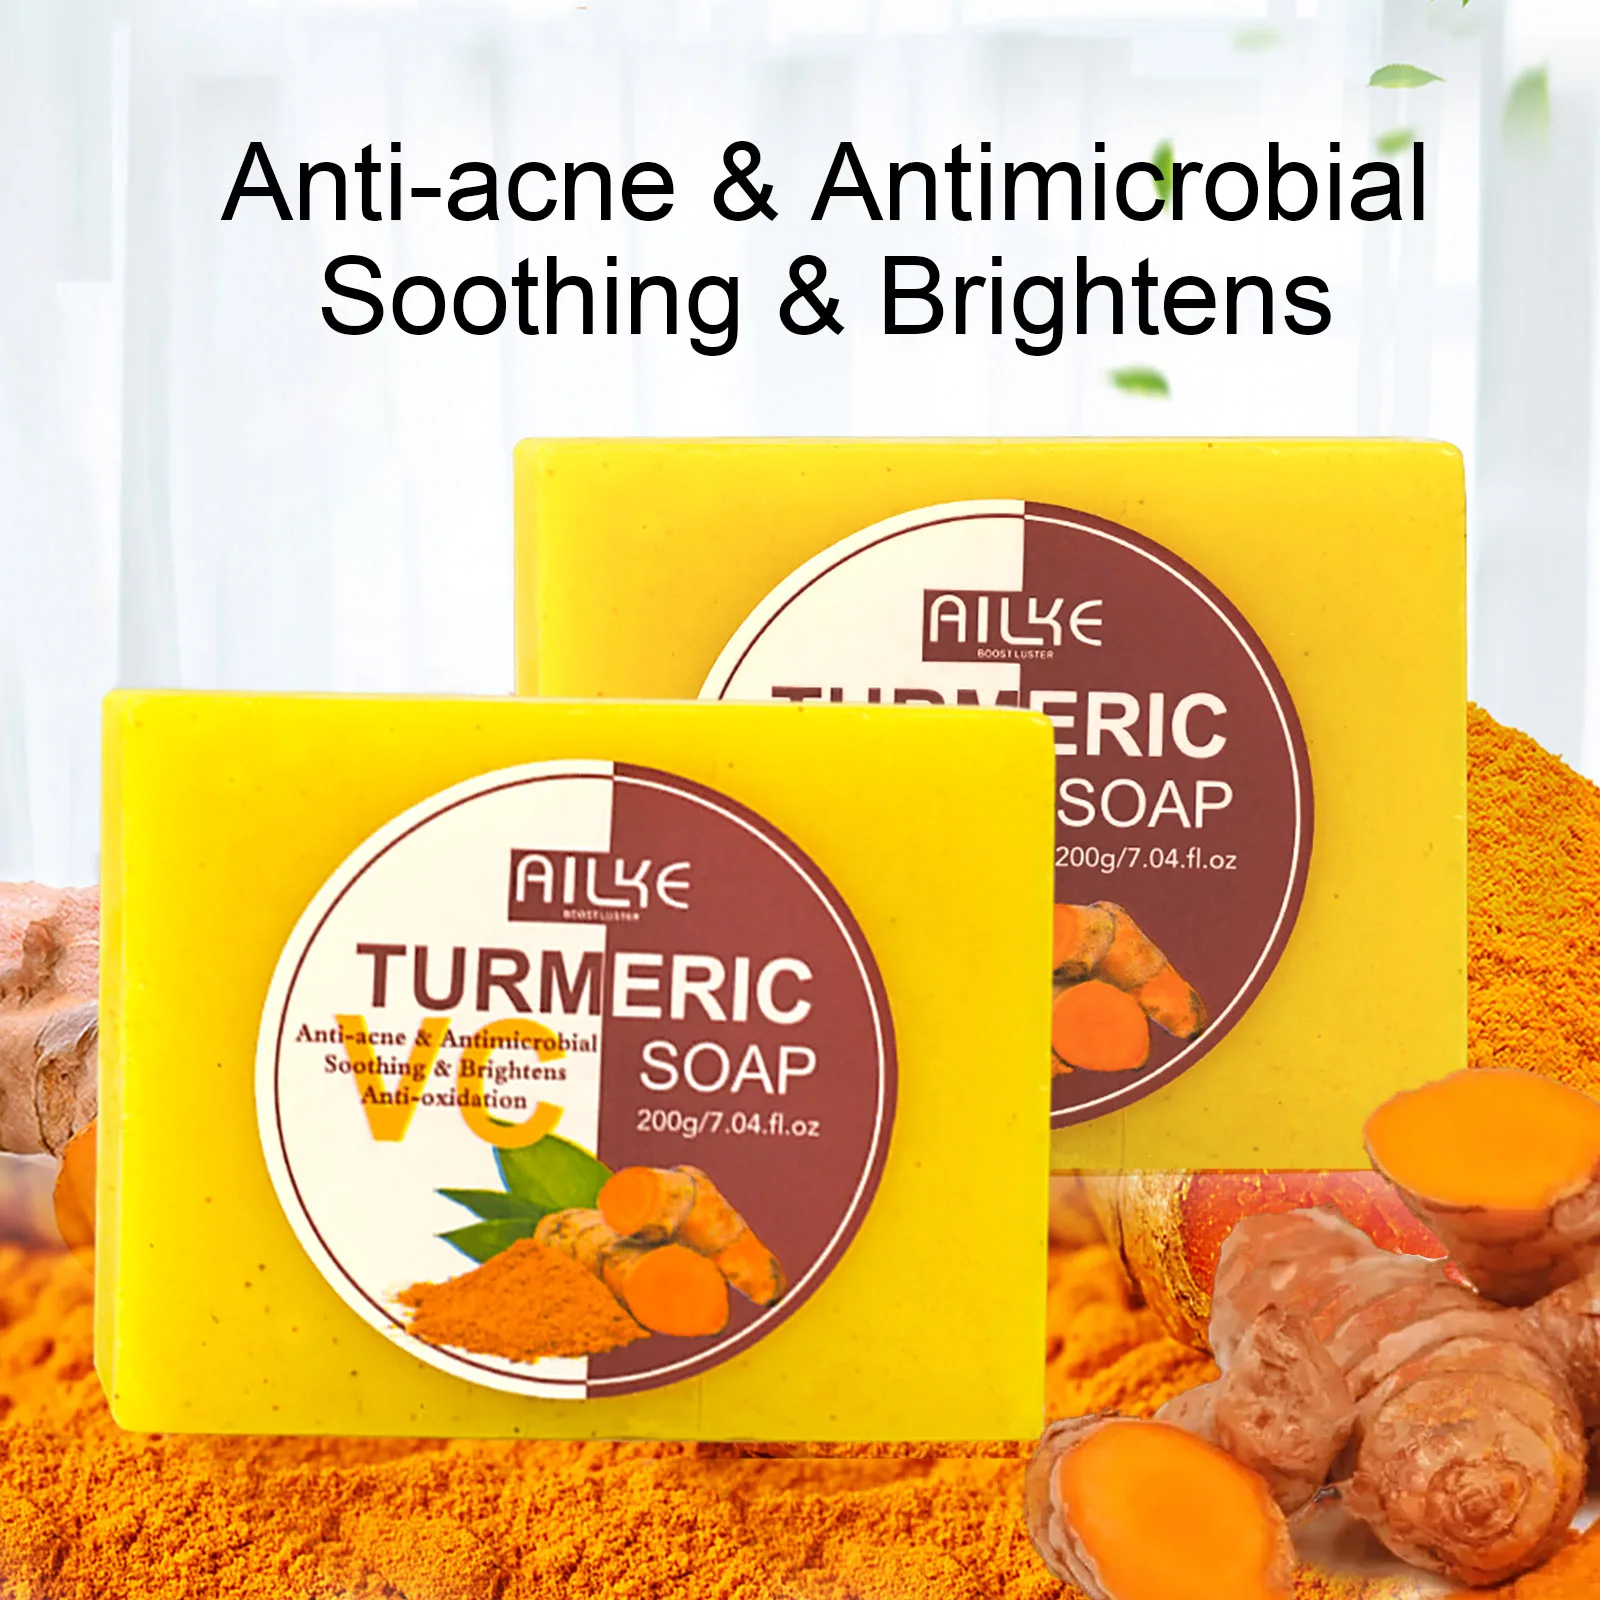 AILKE Acne Treatment Turmeric Soap, Deeply Cleaning, Exfoliate, Soft & Smooth Skin, Brighten Bar, Suitable for Body and Face Use